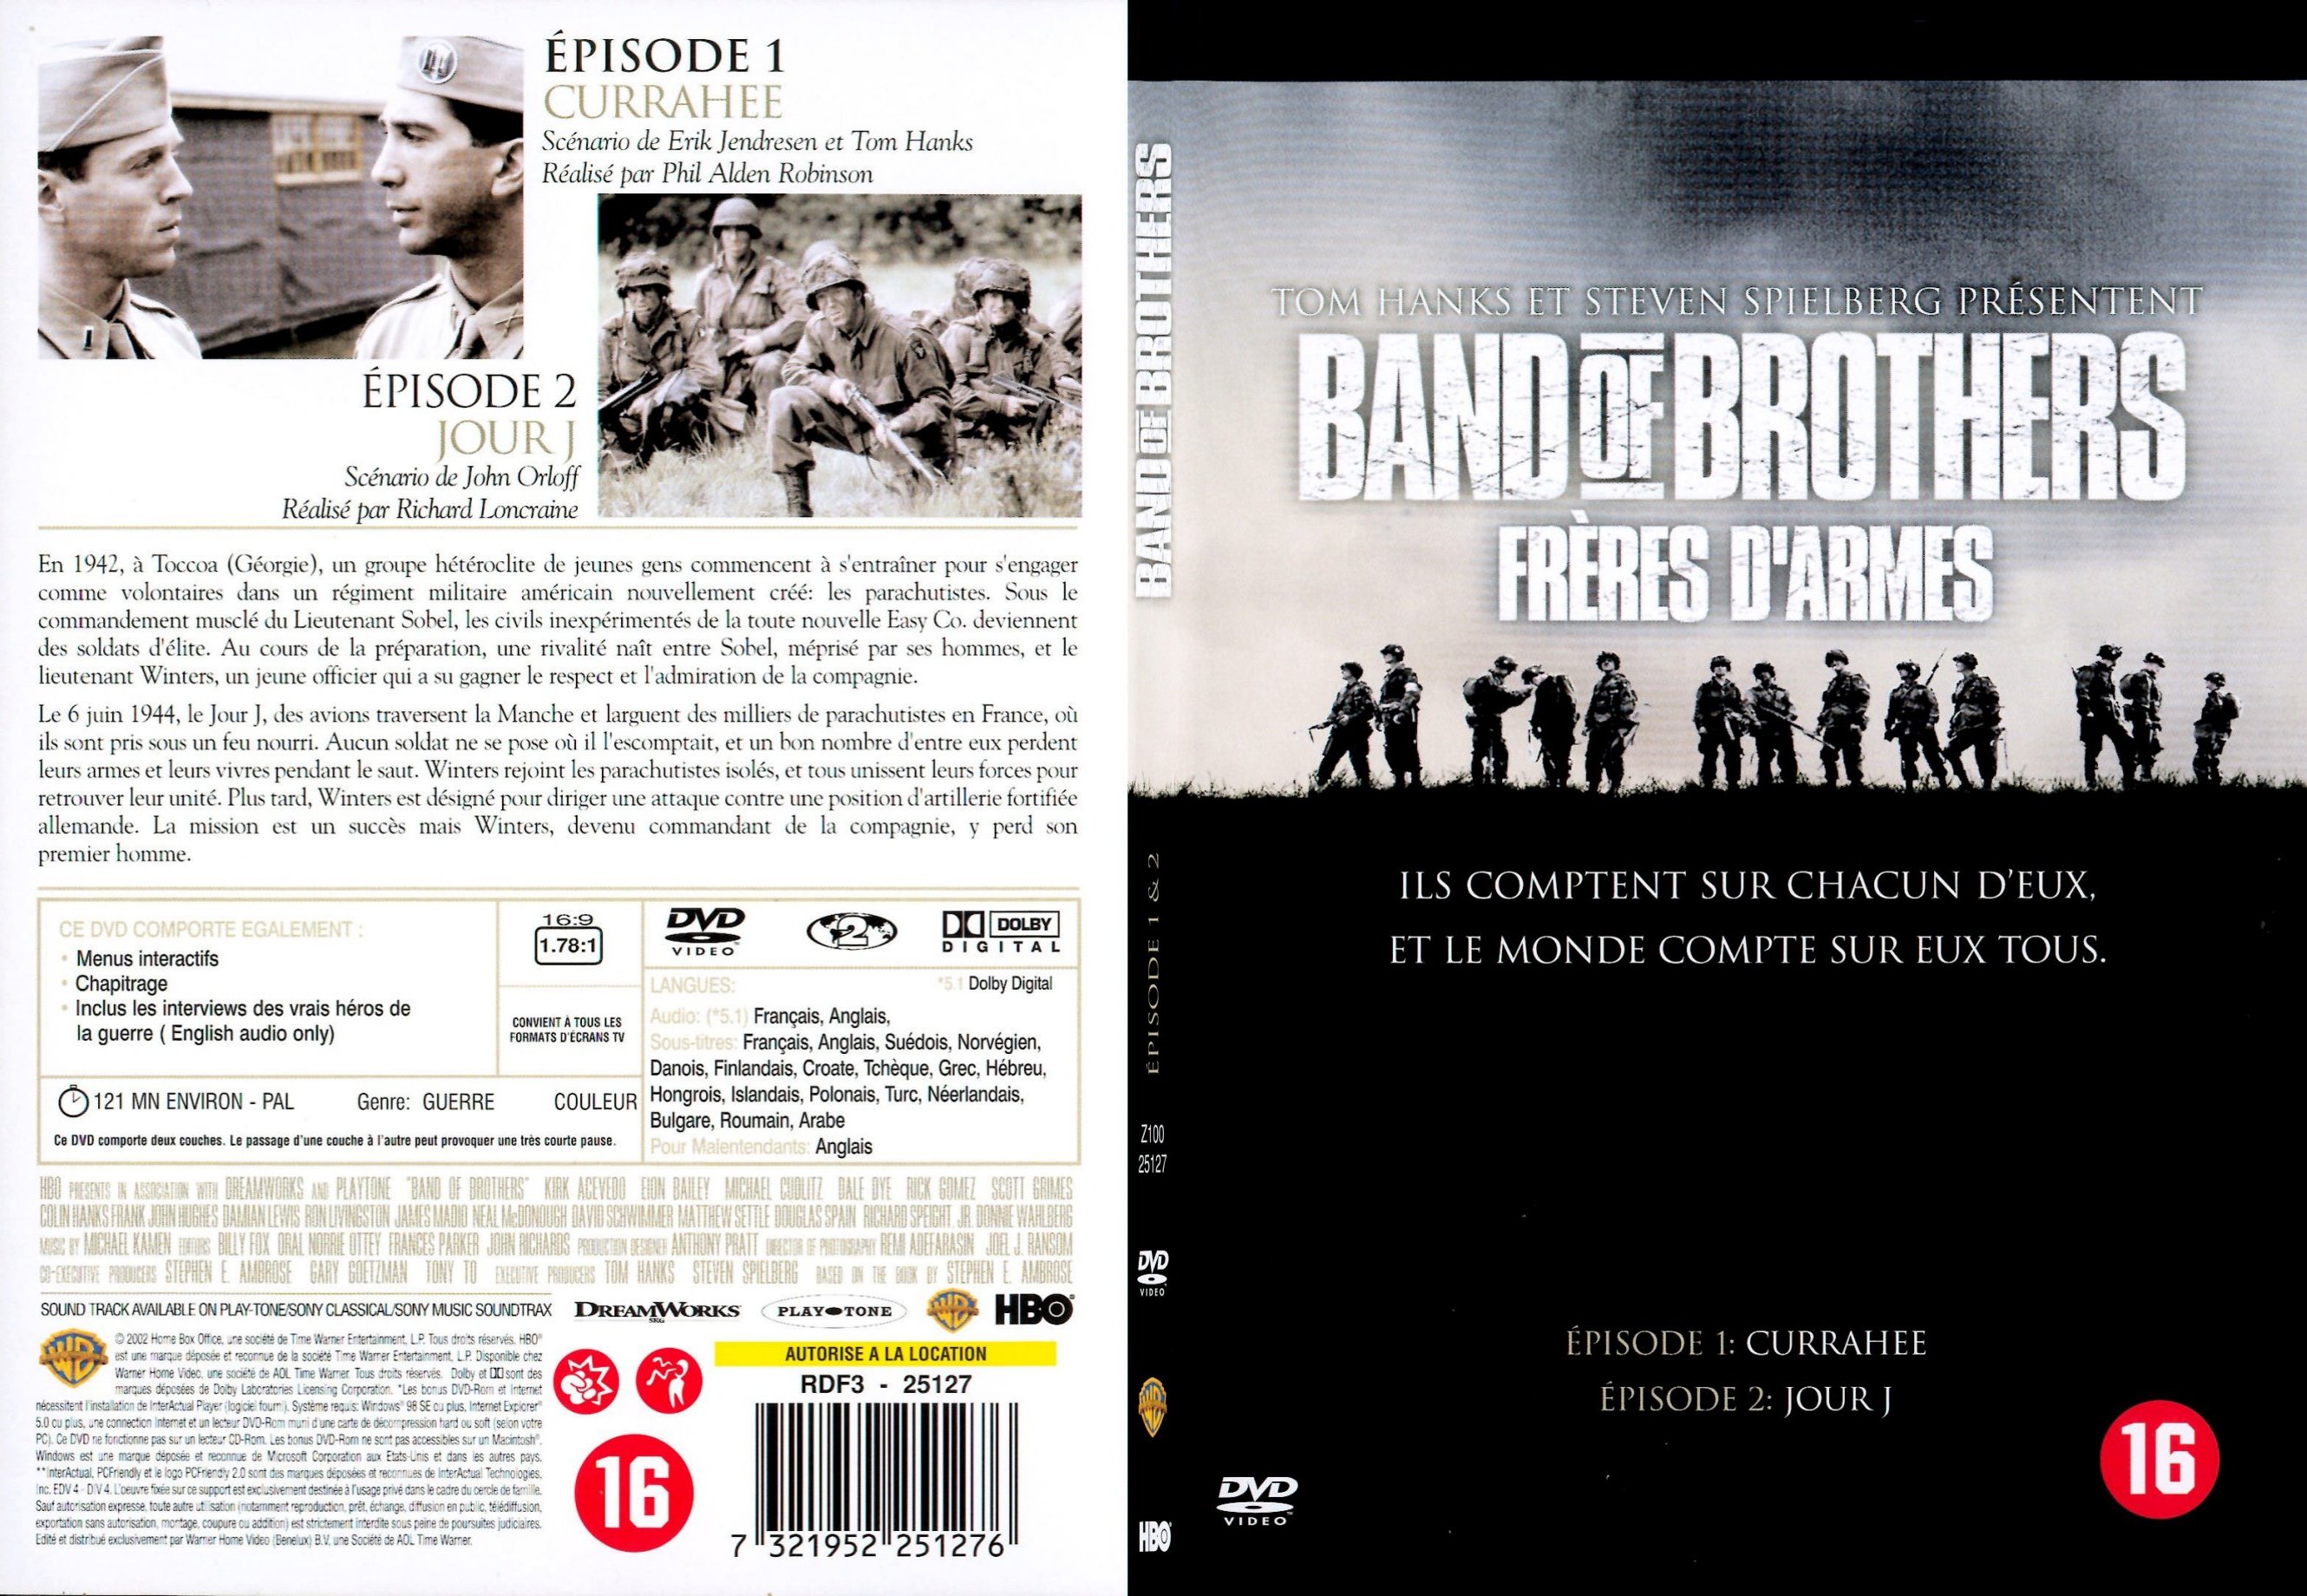 Jaquette DVD Band of brothers vol 1 - SLIM